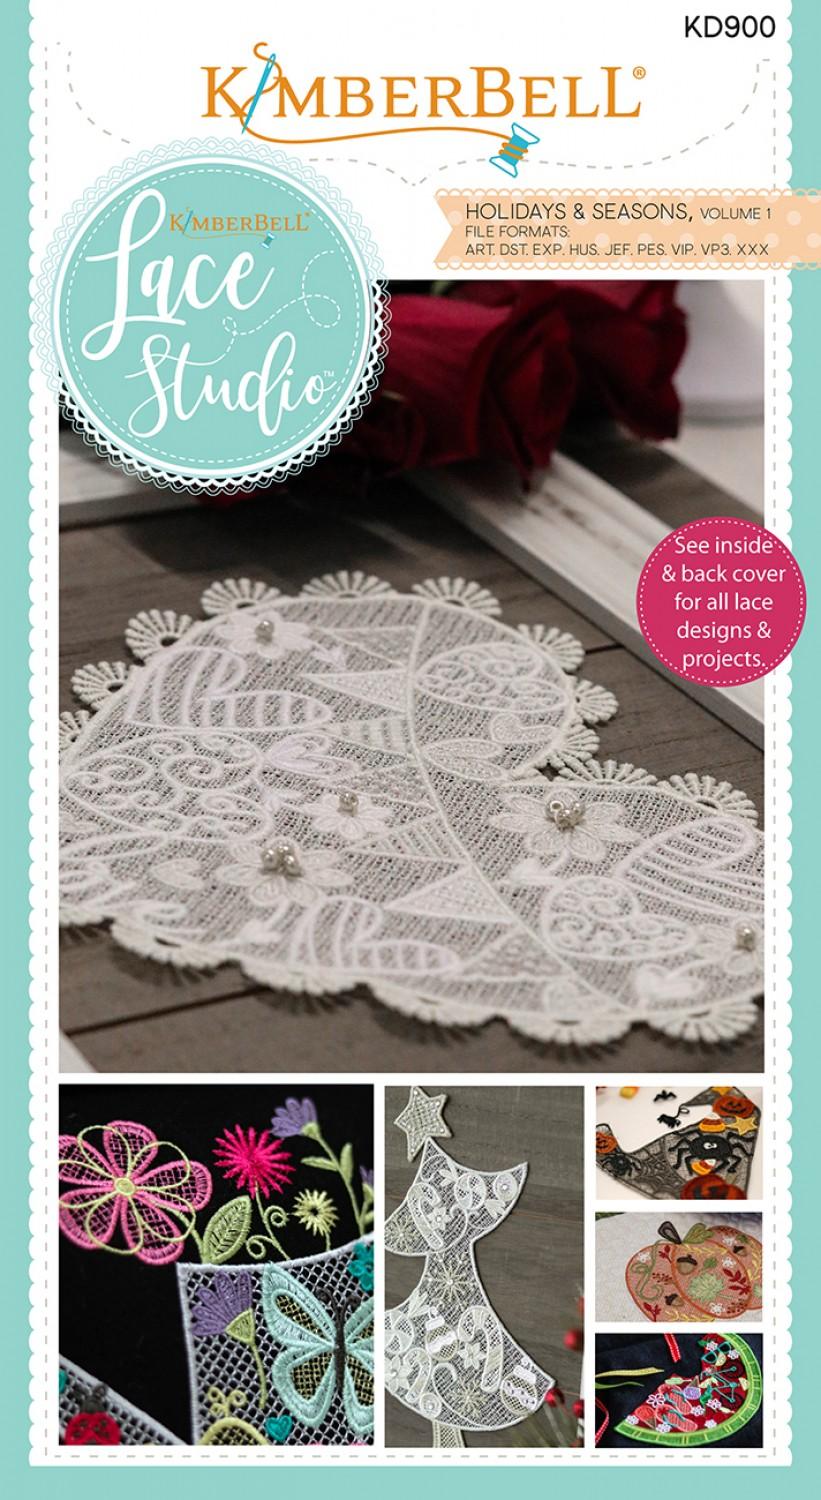 Kimberbell Lace Studio Holidays And Seasons Volume 1 # KD900 - SPECIAL ORDER